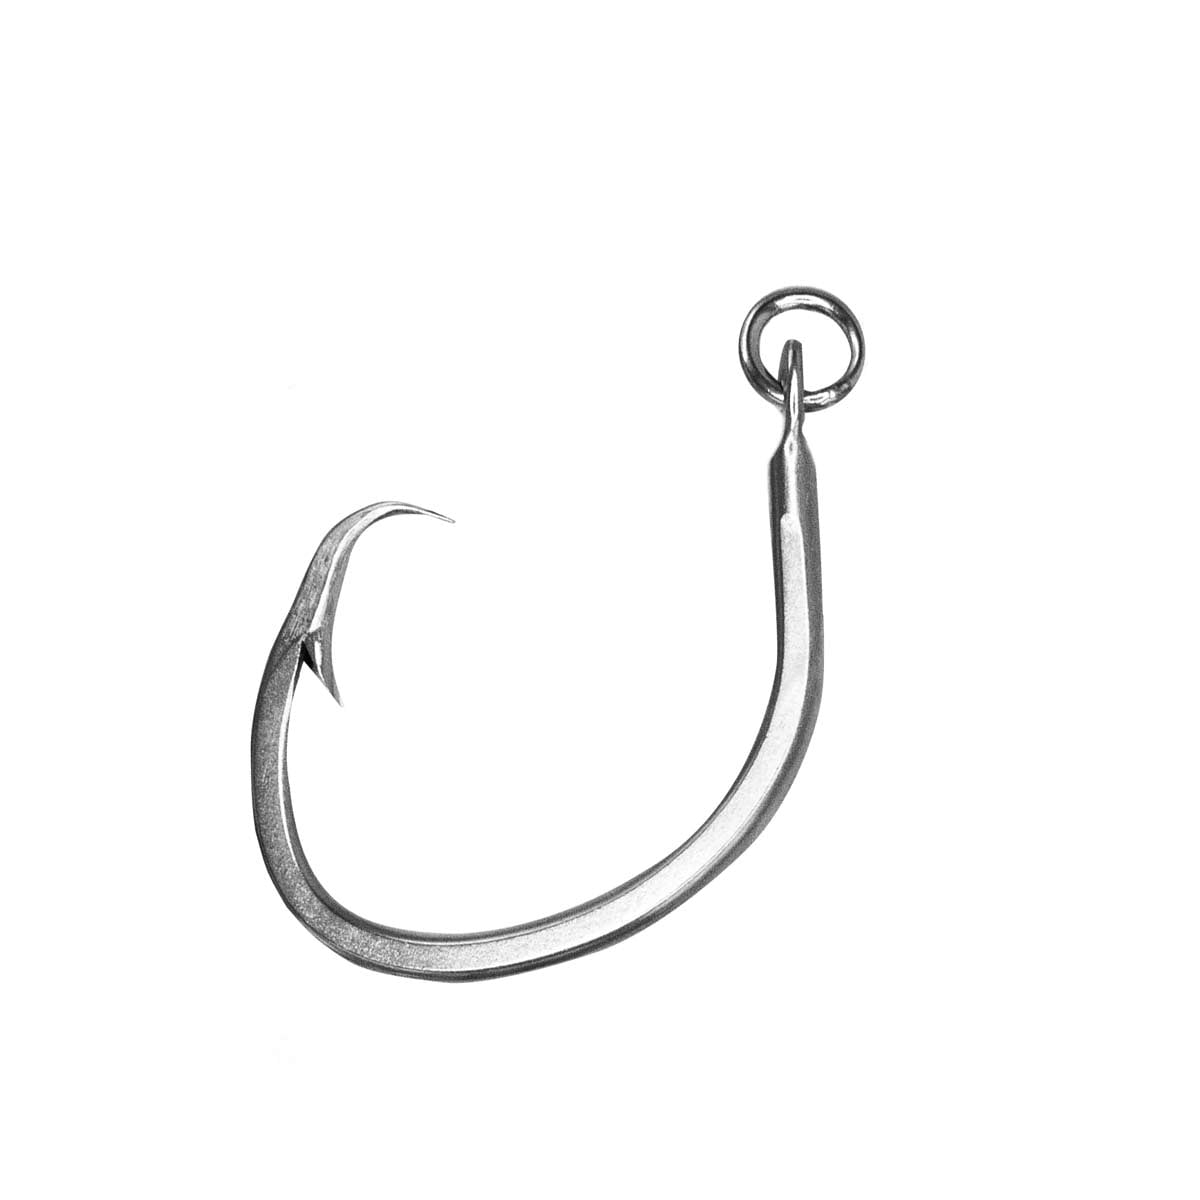 Details about   Baitholder Sea Fishing Saltwater Bait Lure Hooks 1/0 2/0 3/0 packs of 10 and 100 